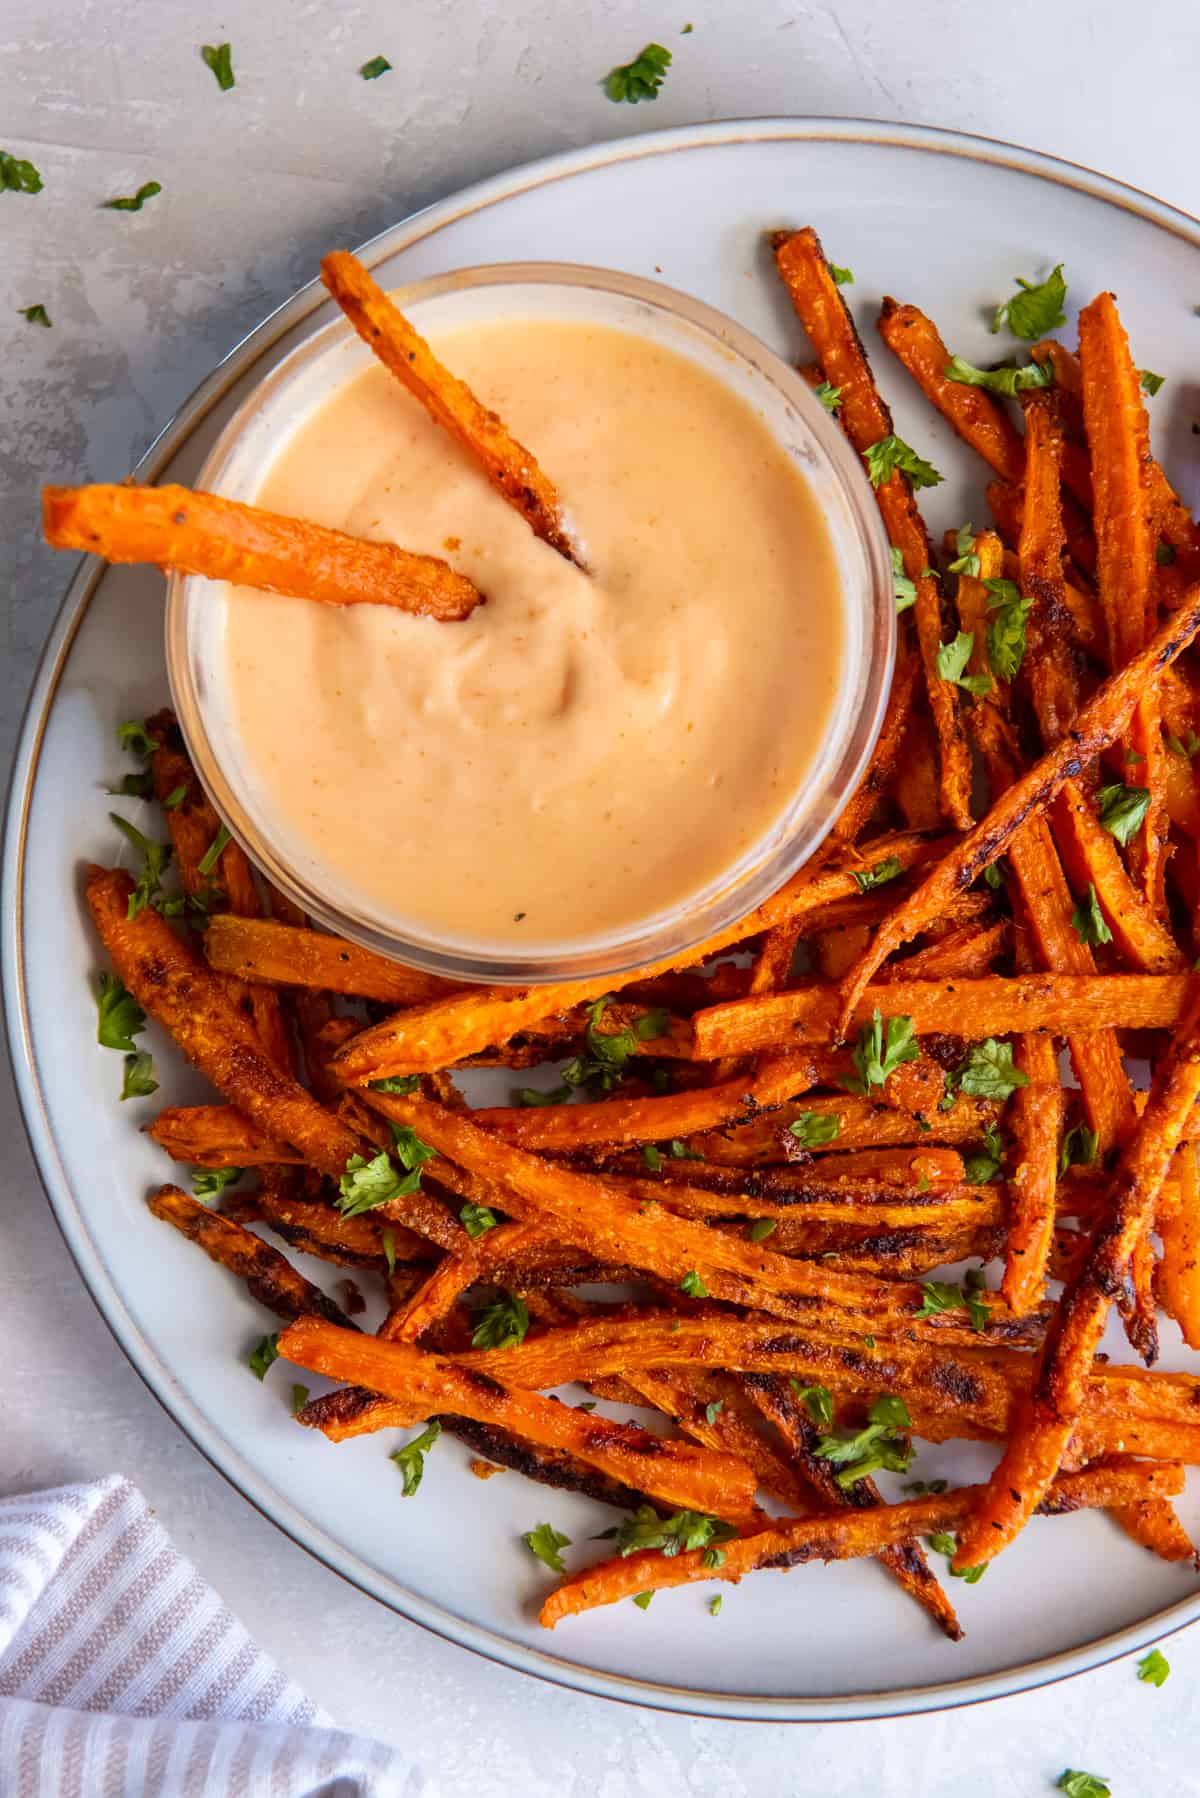 Two carrot fries resting in a bowl on sriacha dipping sauce on a white plate.